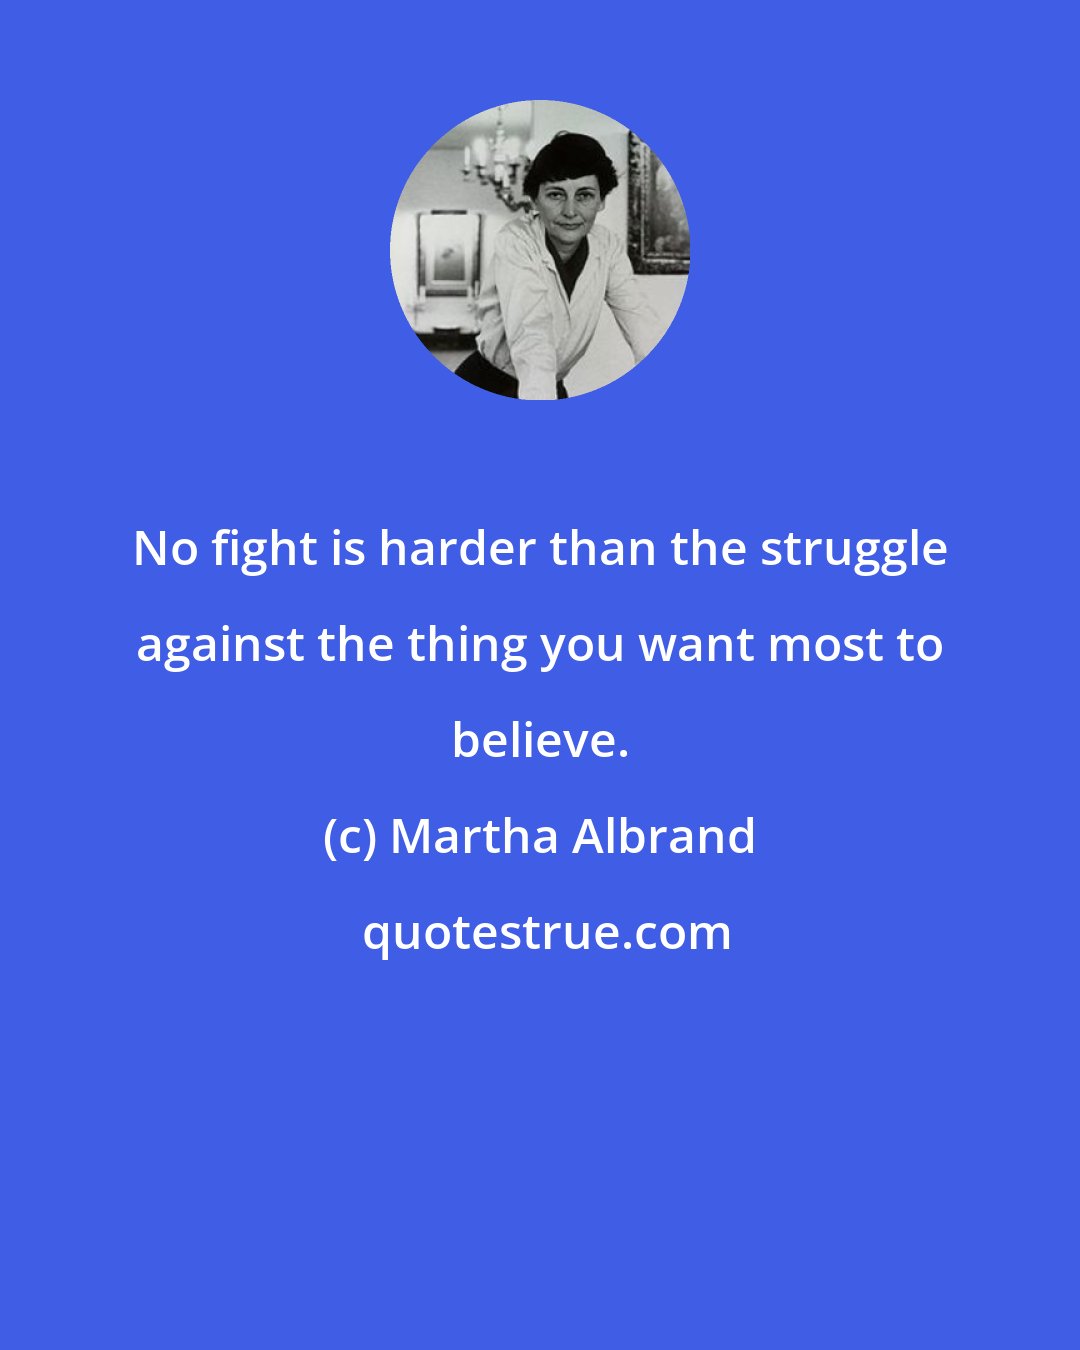 Martha Albrand: No fight is harder than the struggle against the thing you want most to believe.